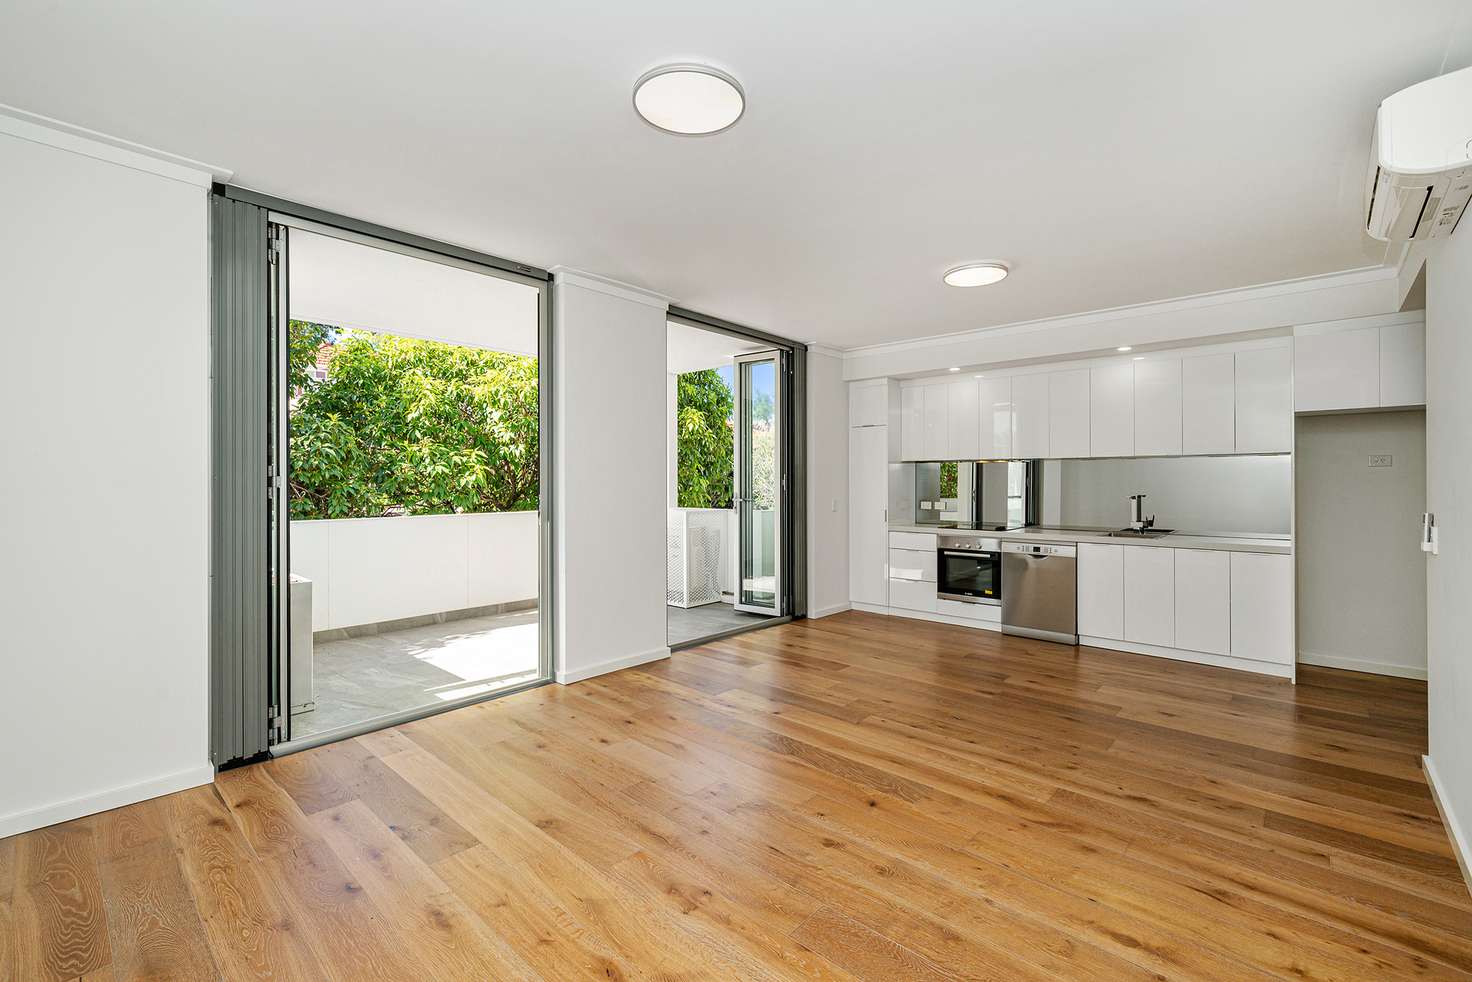 Main view of Homely apartment listing, 12/181 Walcott Street, Mount Lawley WA 6050